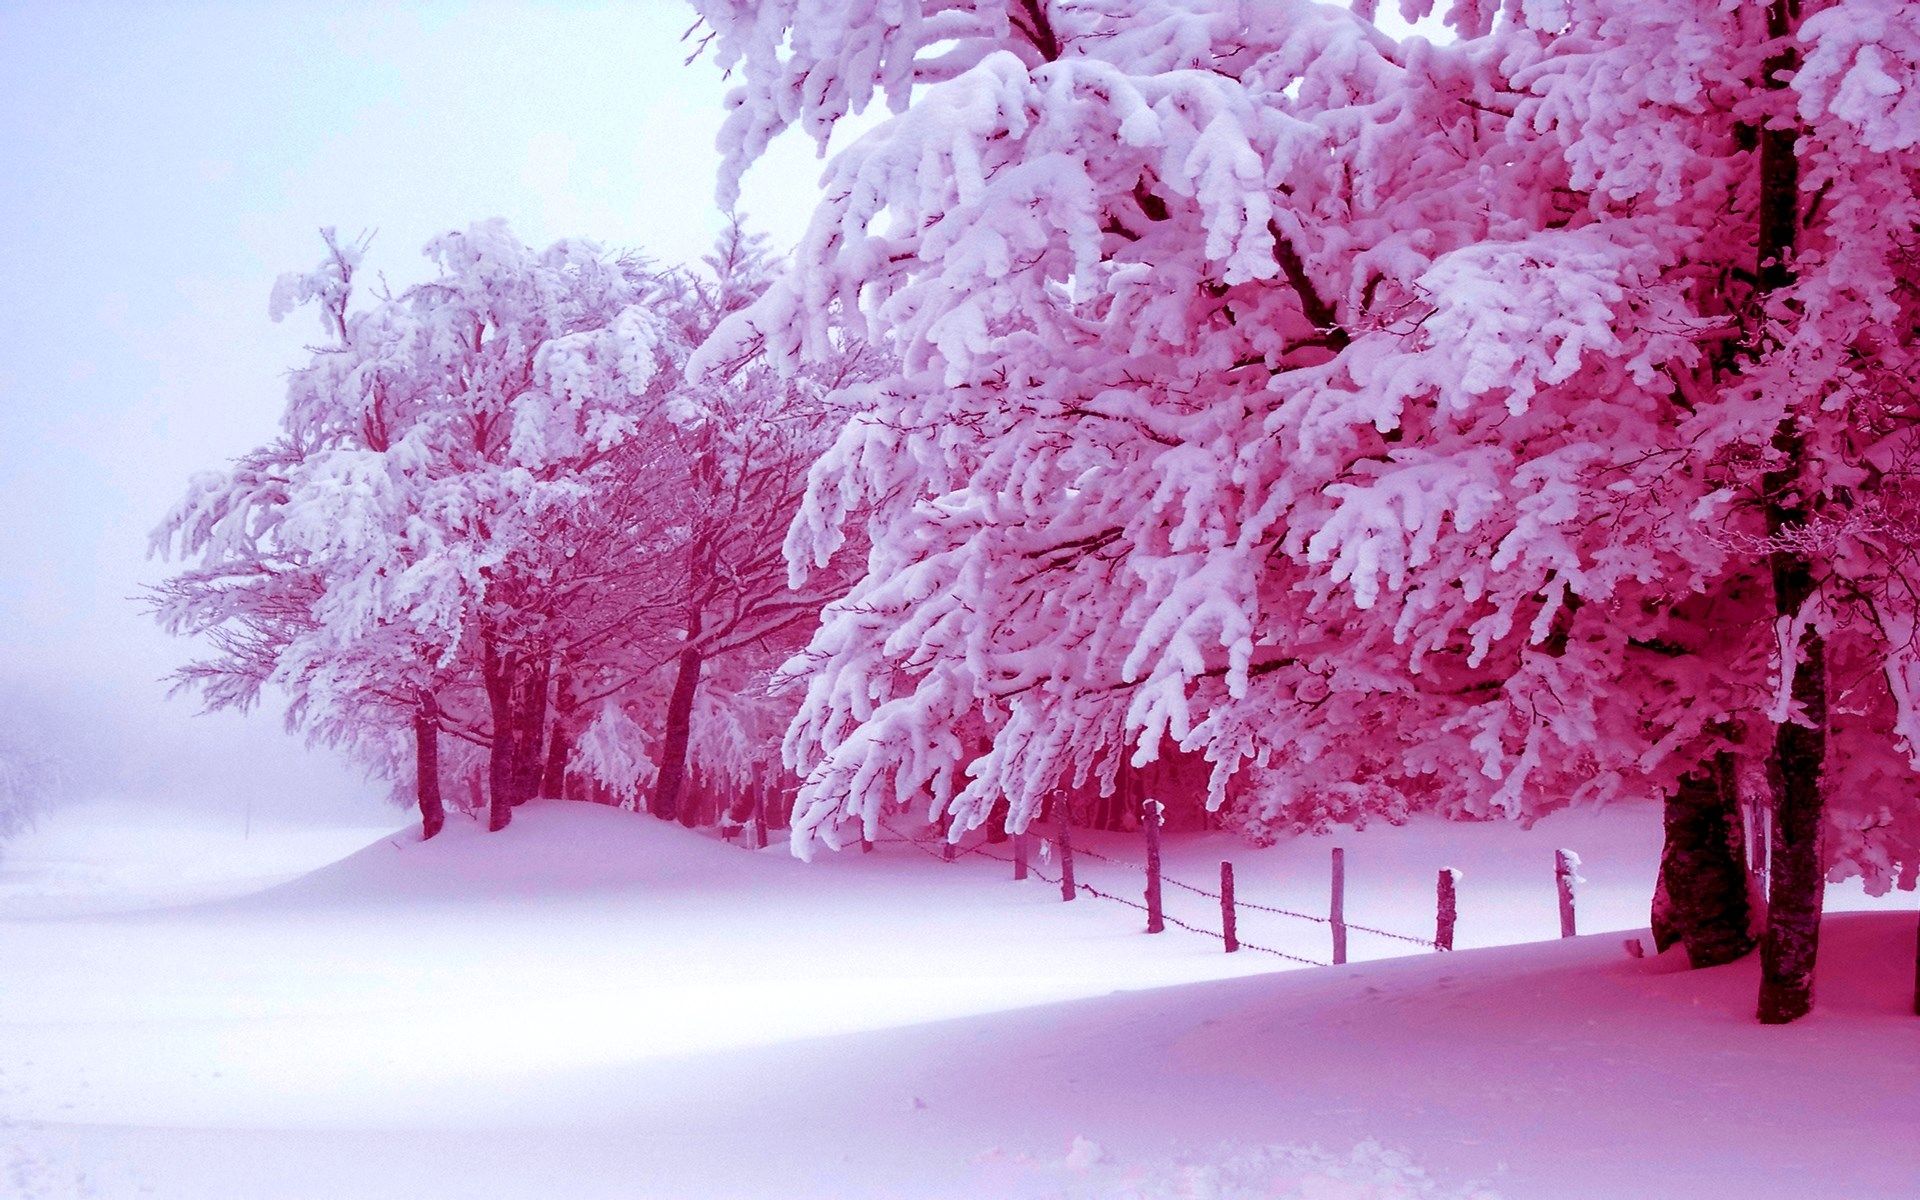 Winter Trees Backgrounds posted by Samantha Johnson